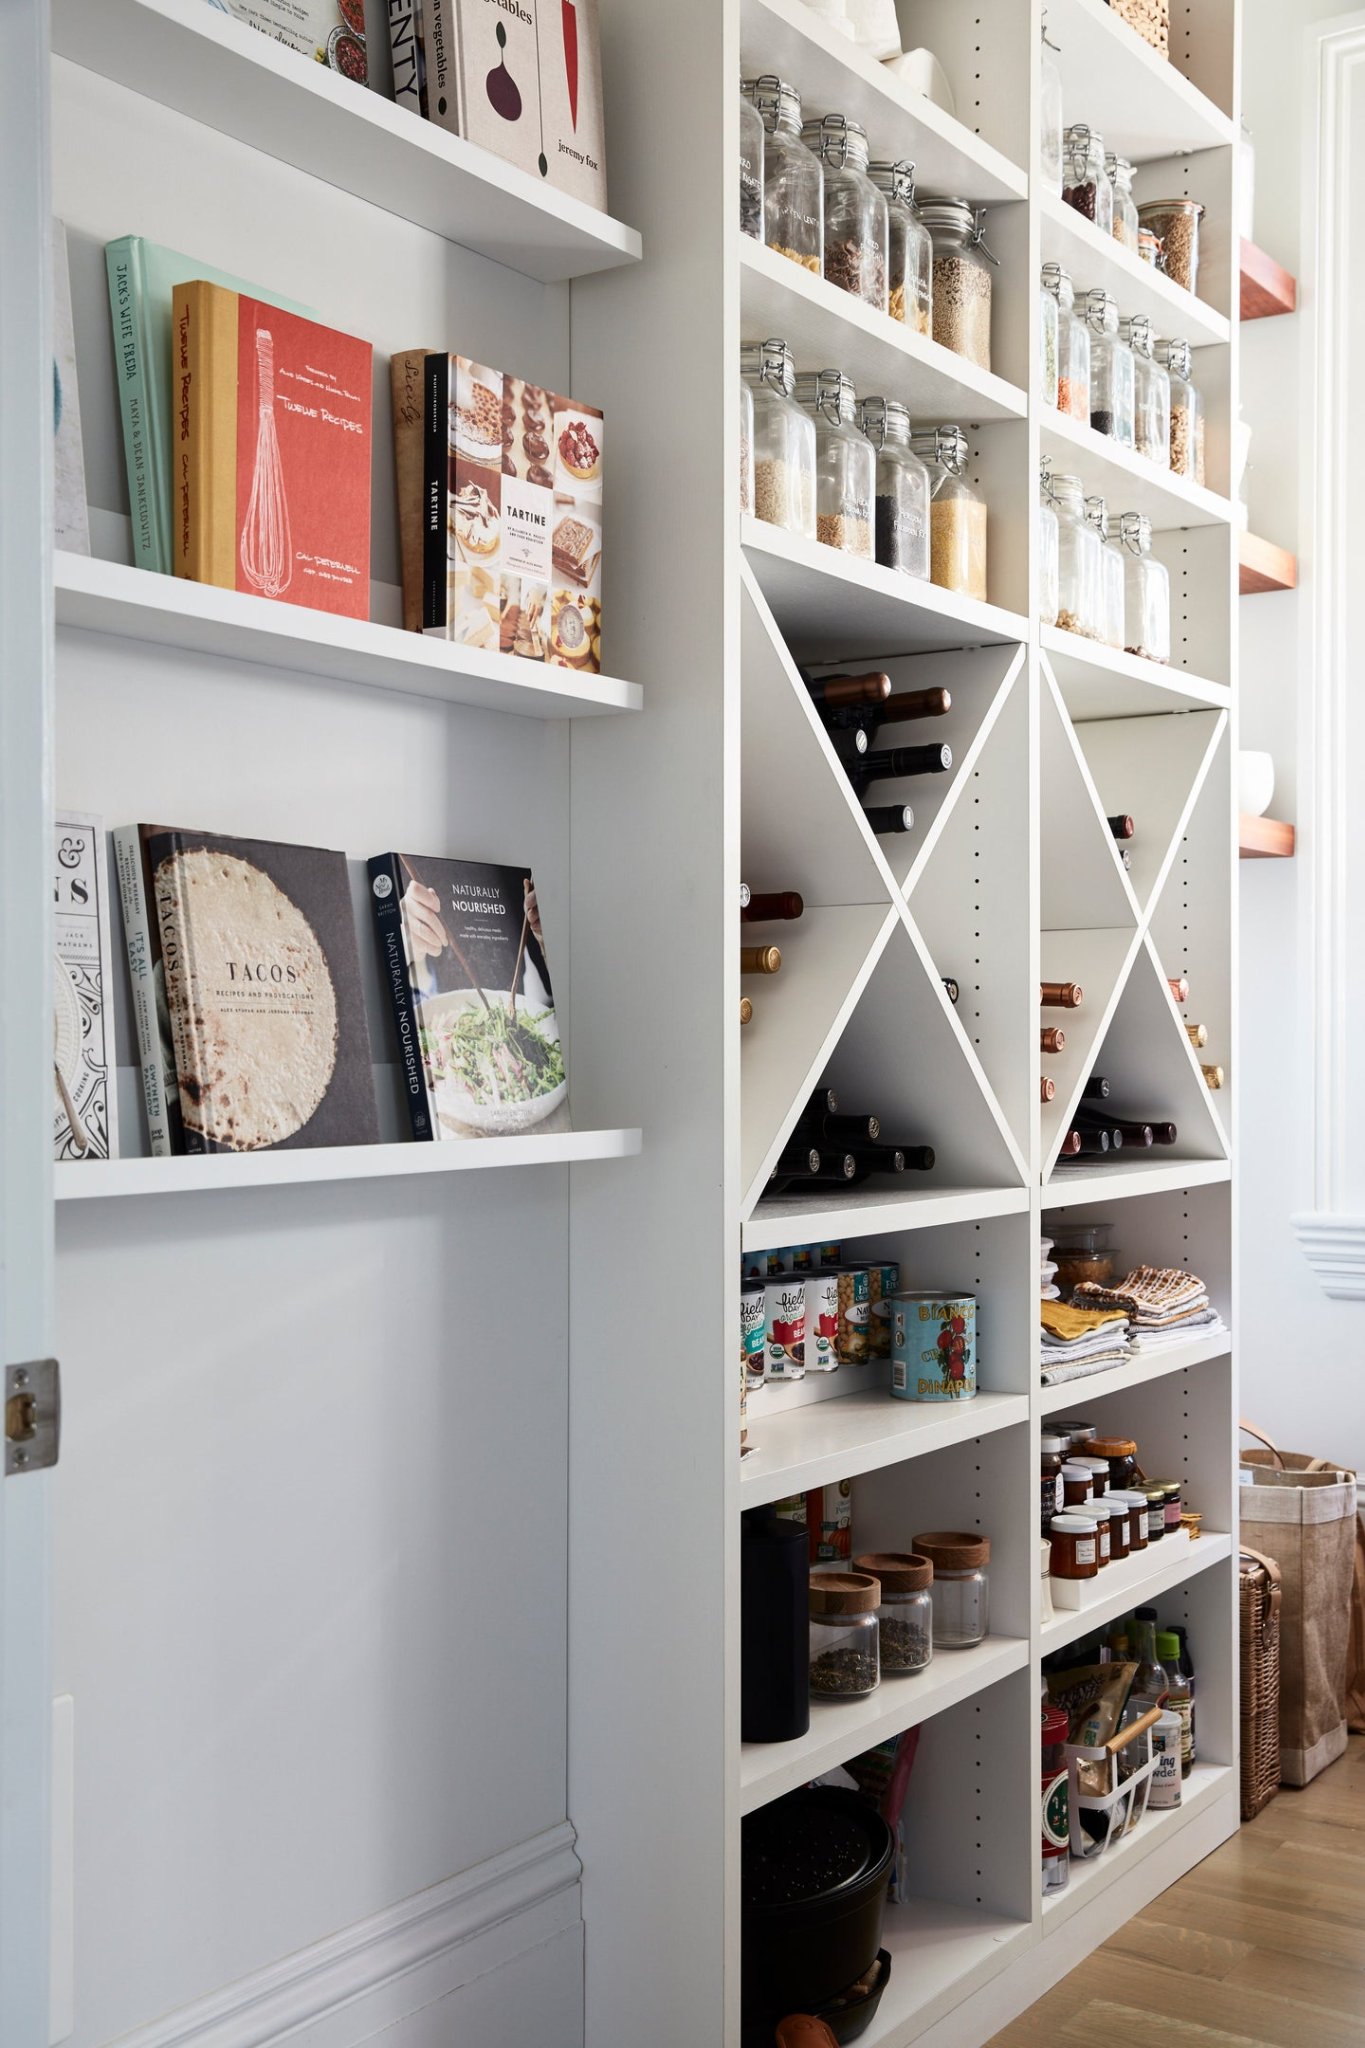 A Step-by-Step Guide to Organizing Your Kitchen Pantry